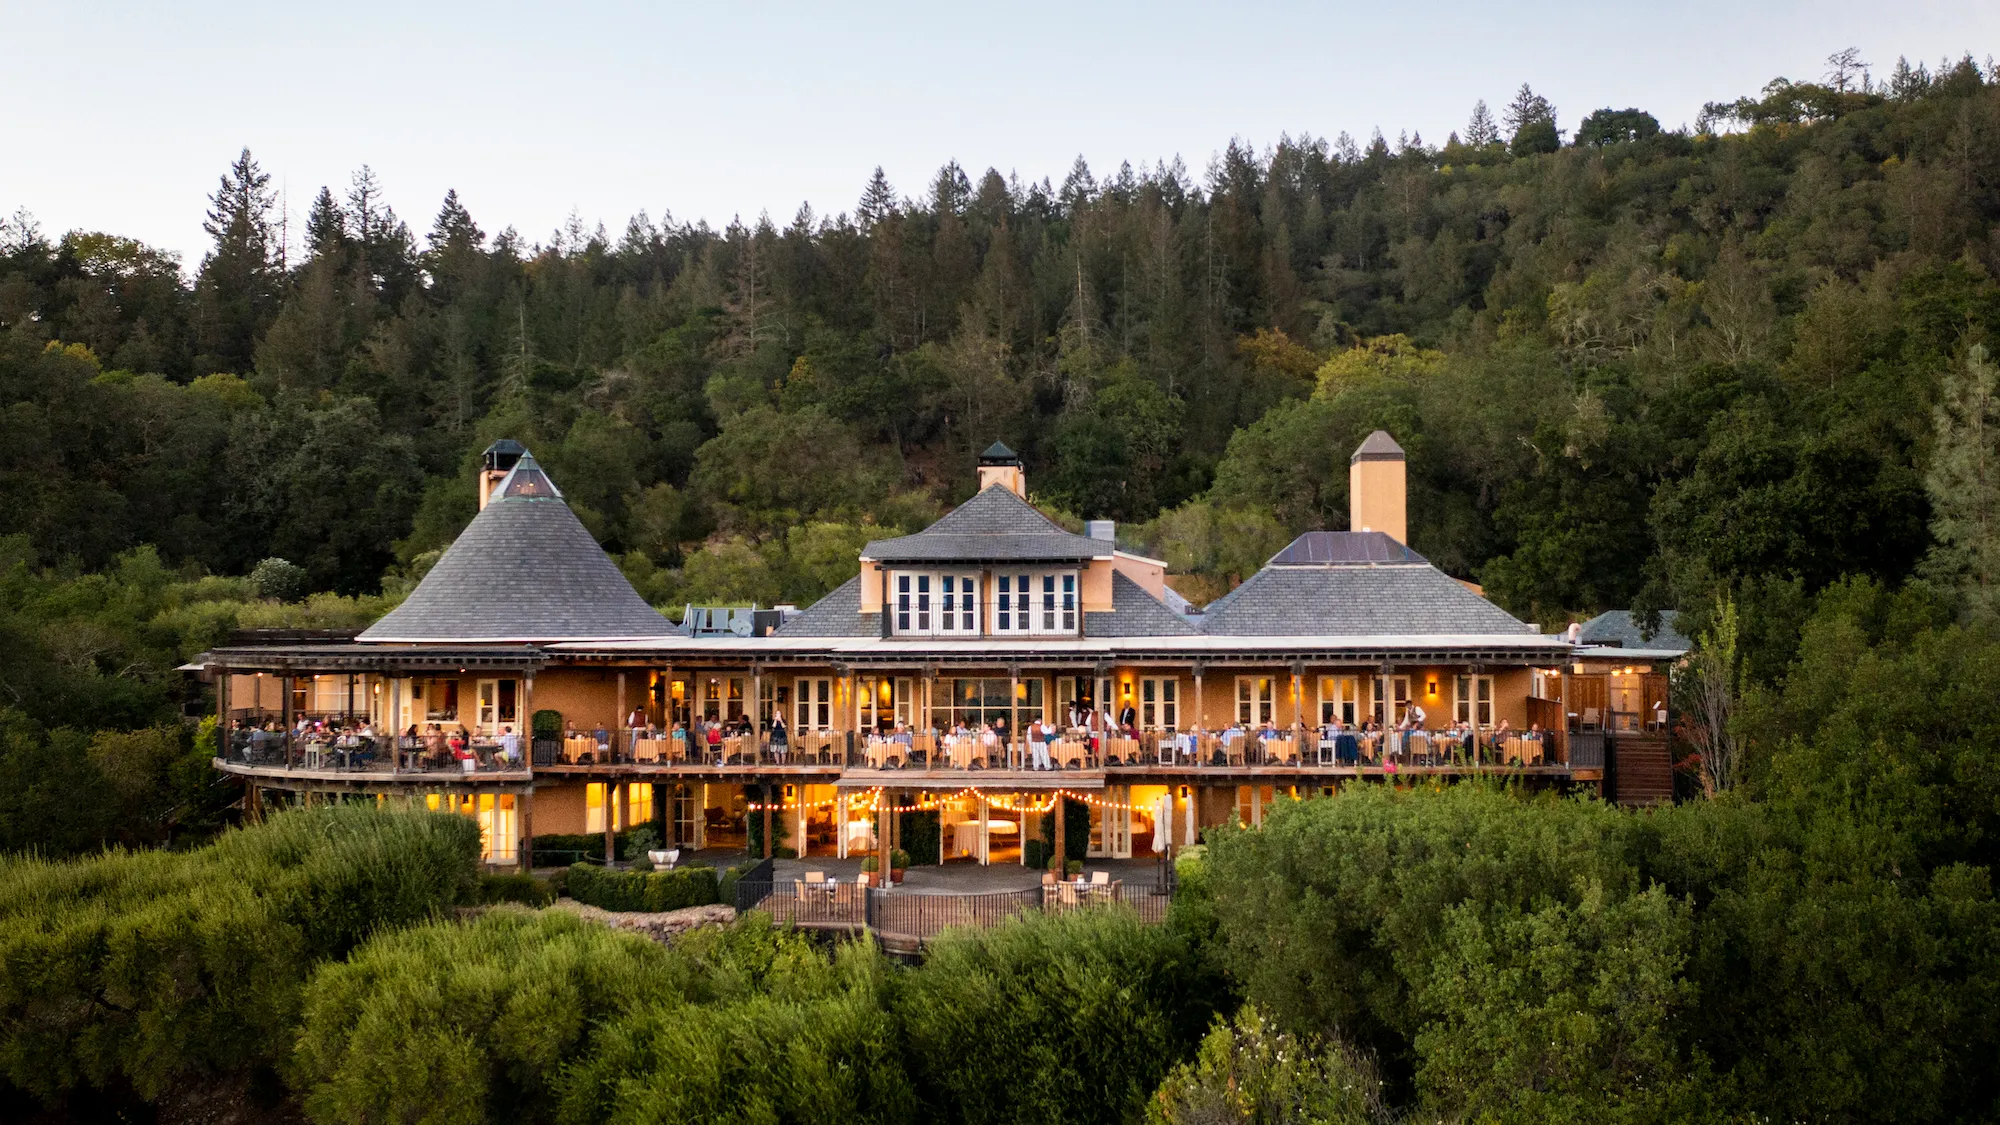 Auberge du Soleil’s tranquil destination makes it one of the most luxurious romantic getaways in Napa Valley.